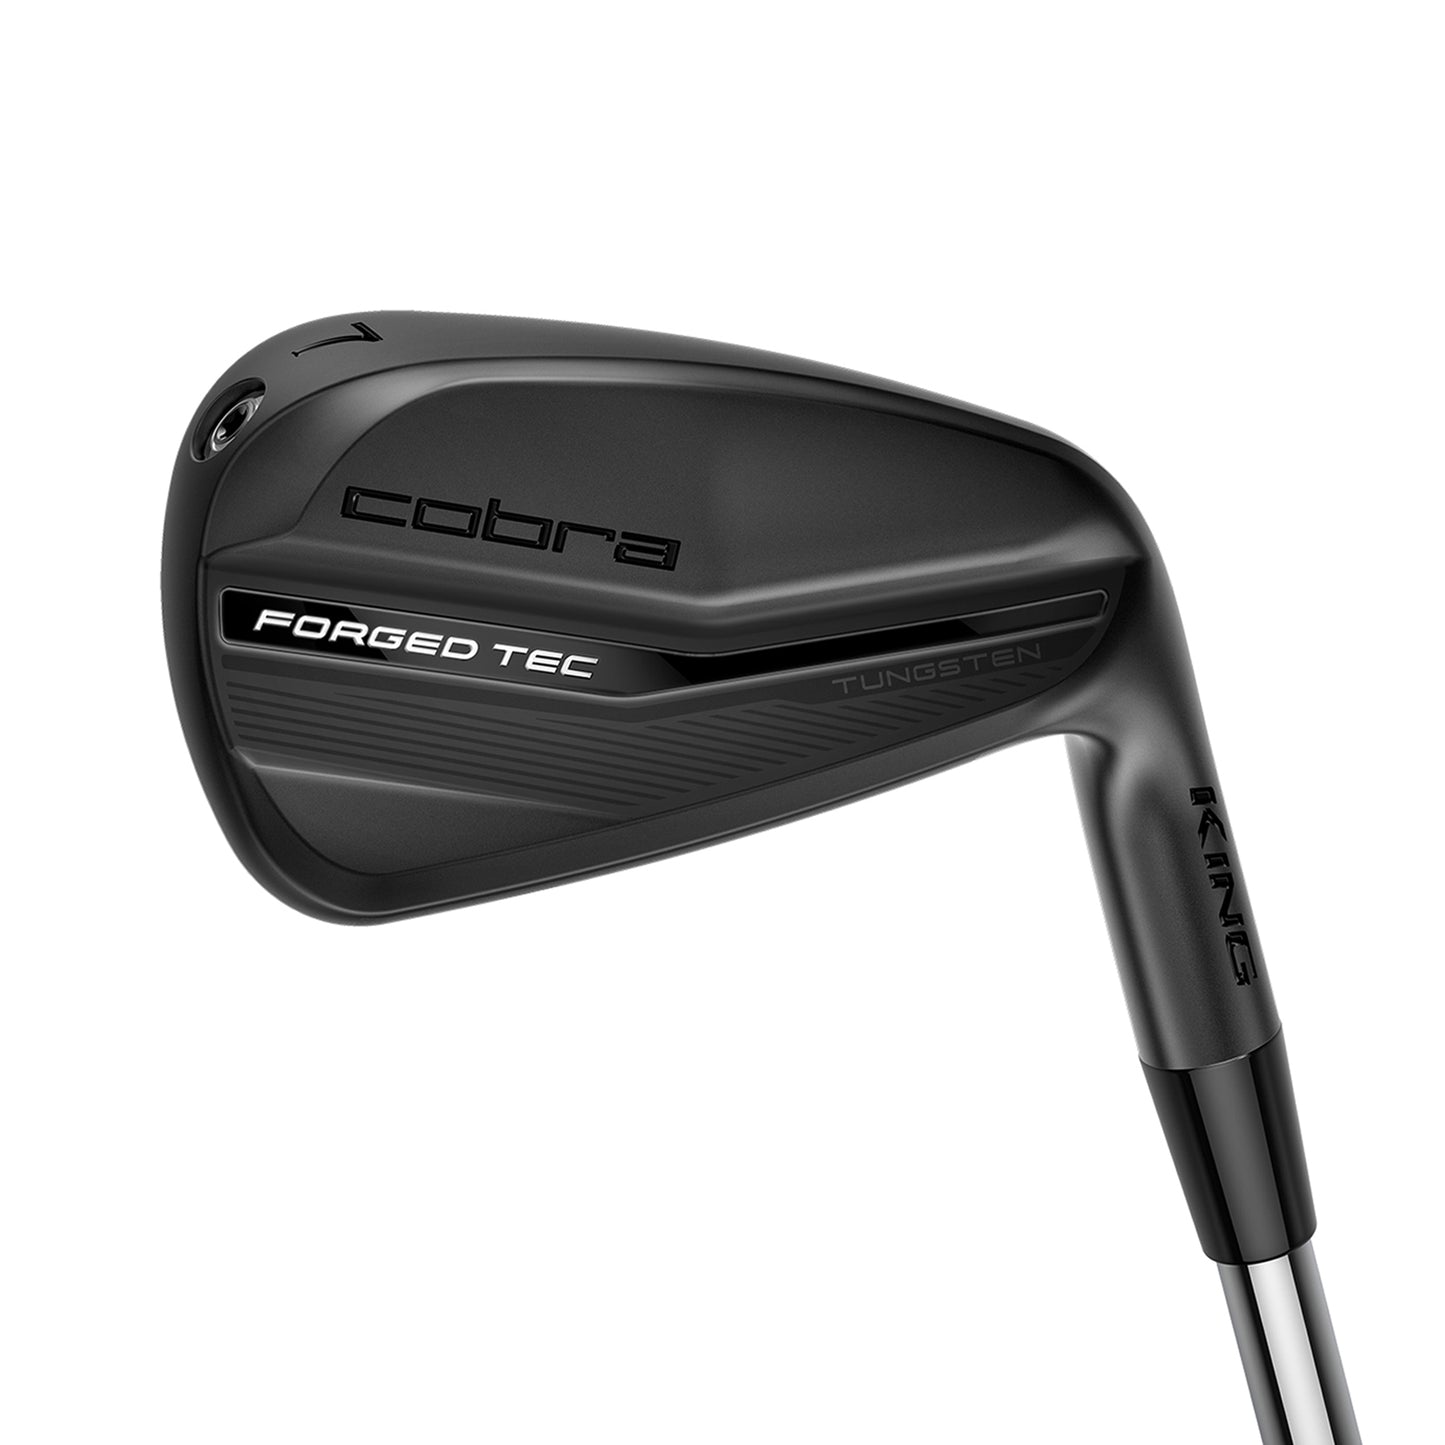 KING Forged Tec Black Irons